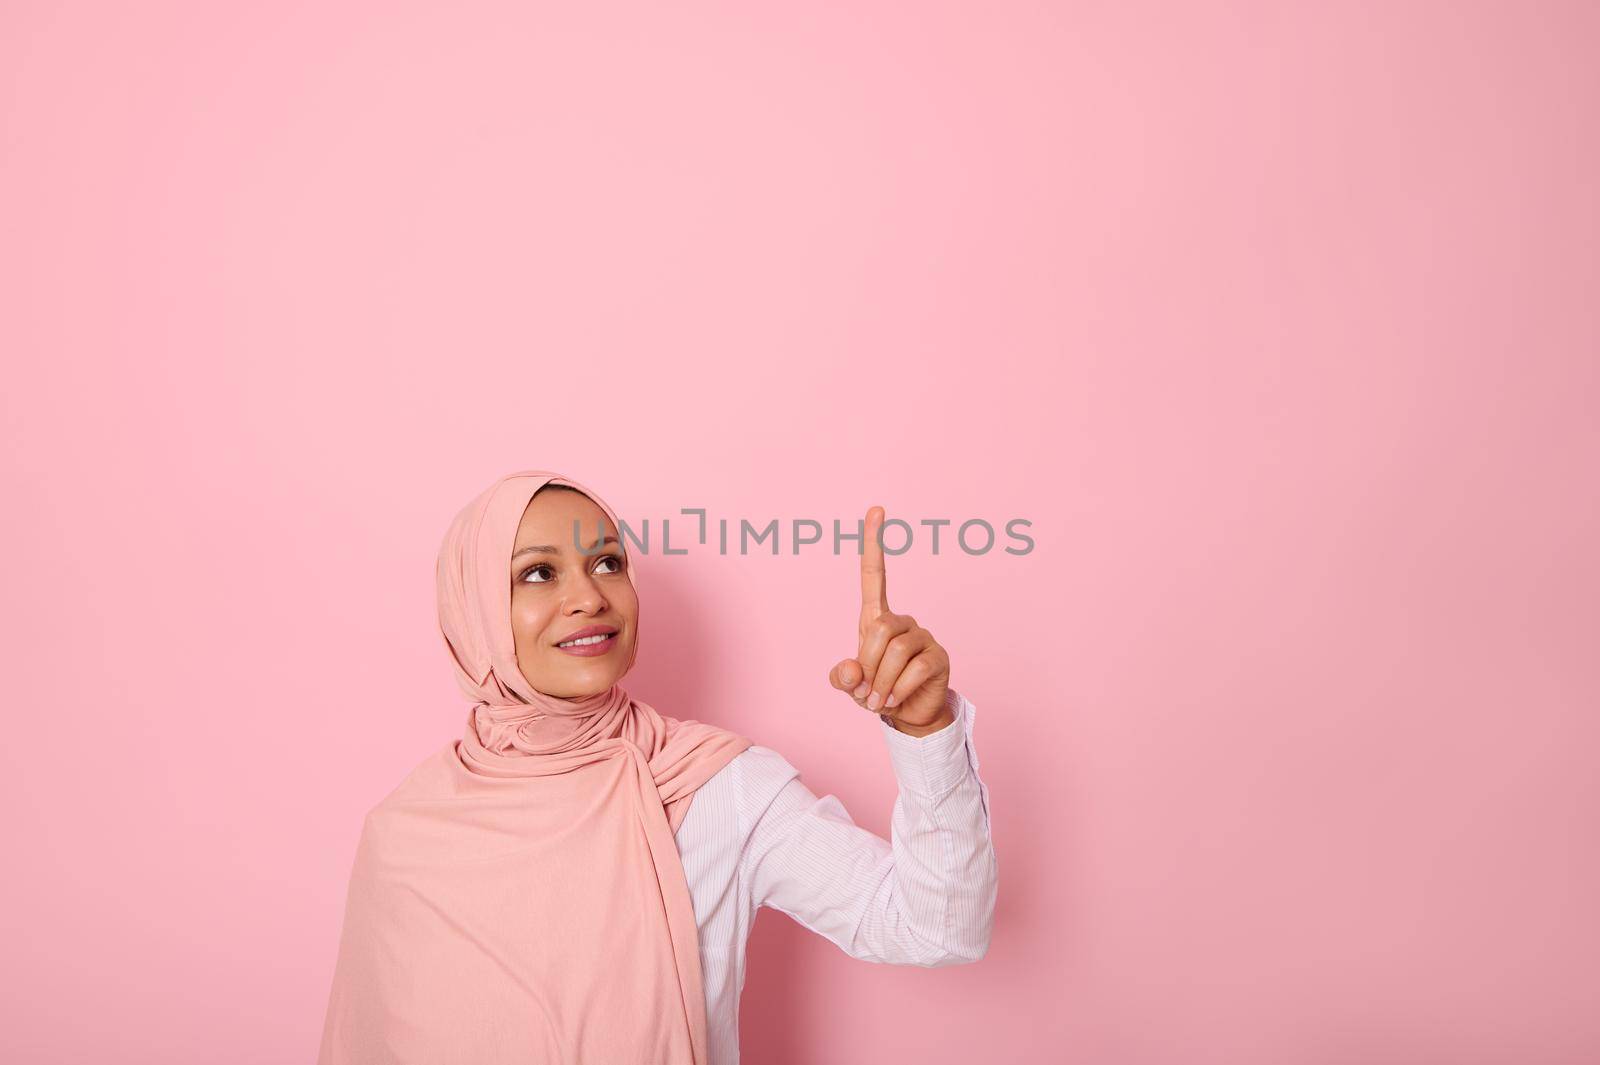 Beautiful Muslim woman of Middle Eastern ethnicity dressed in religious outfit and covered head with hijab ethnicity smiles and looks up pointing her index finger up on a copy space of pink background